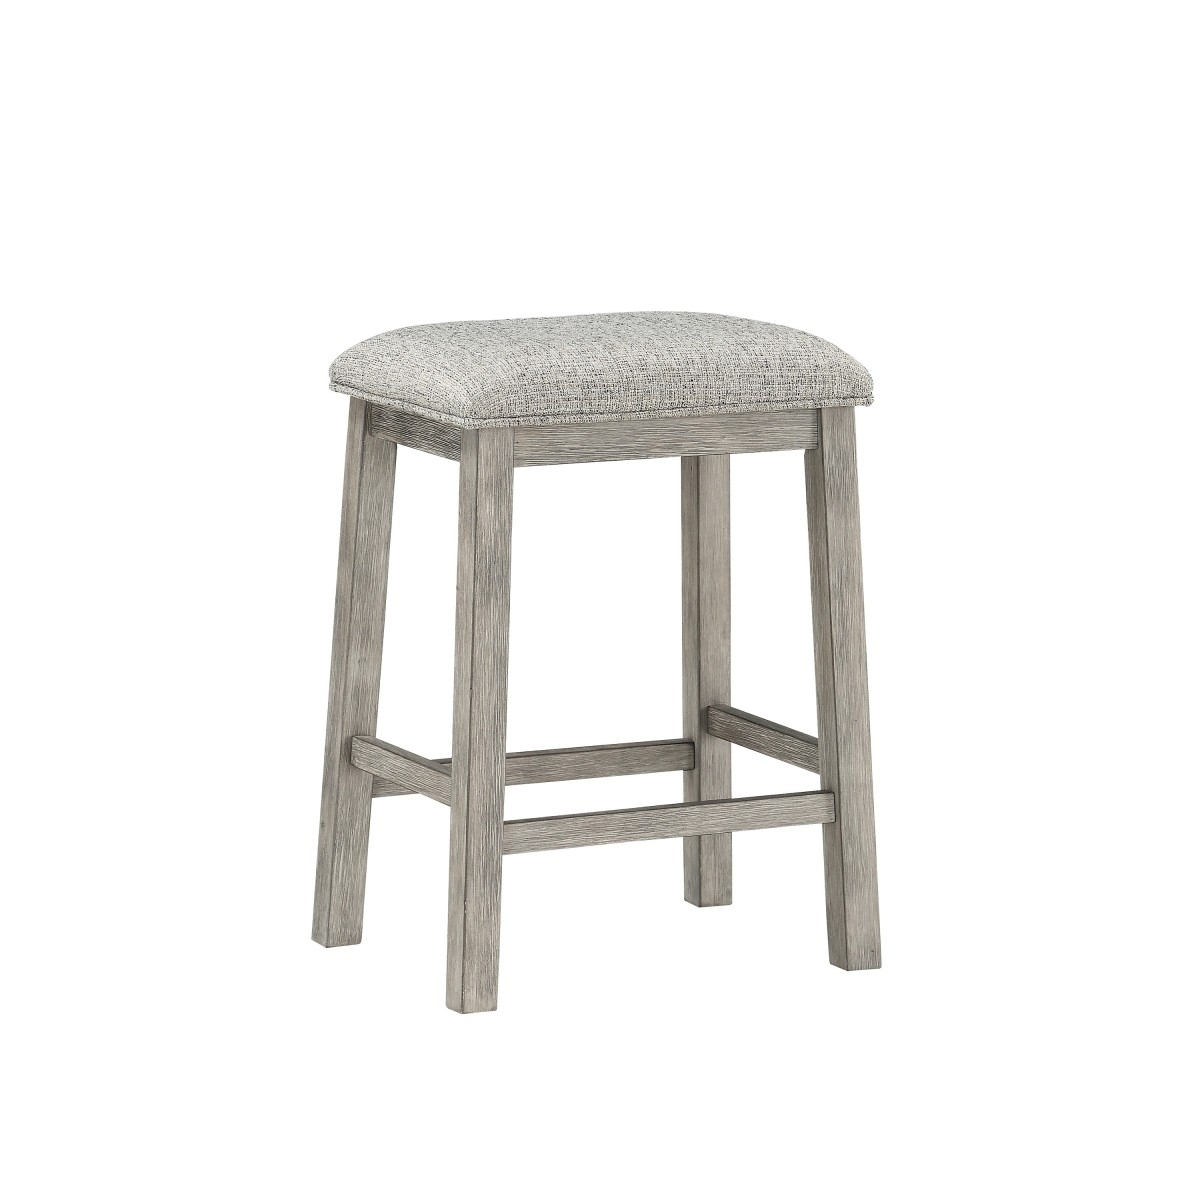 Trestle Base Counter Height Table With Fabric Backless Stools,Set Of 3,Gray- Saltoro Sherpi